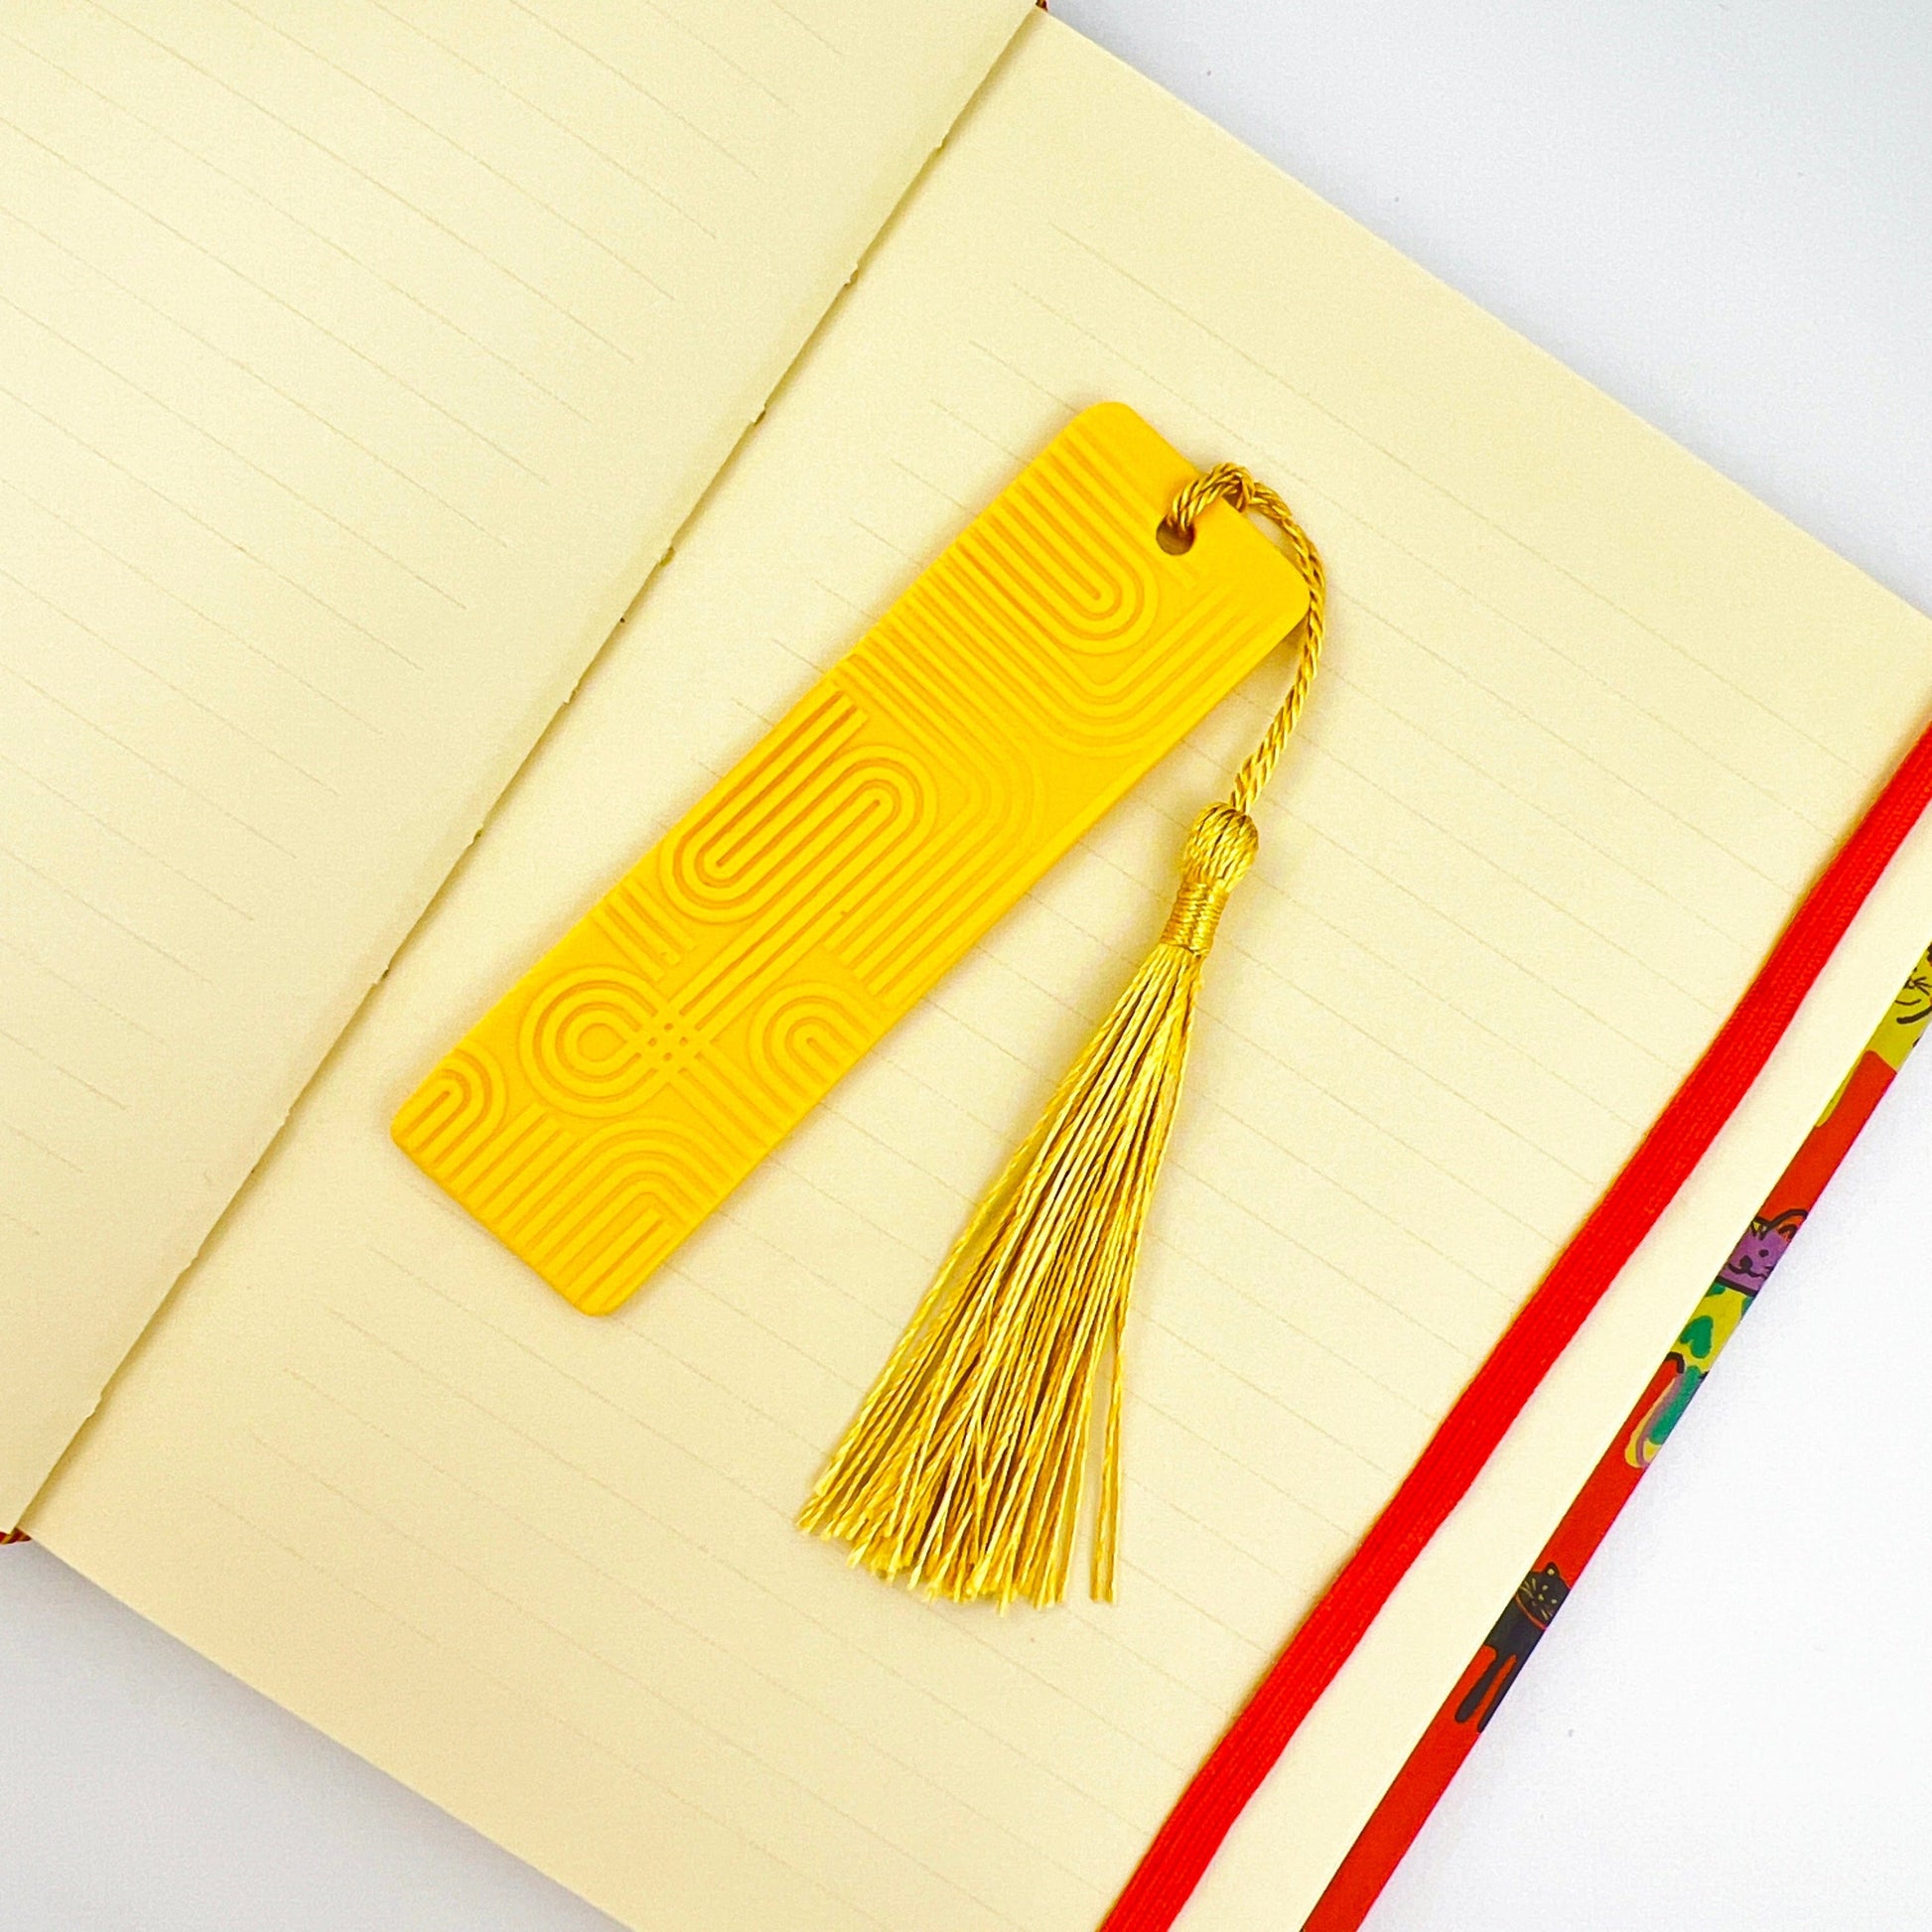 Bookmarks Yellow Curved Lines Short Curved Edge Bookmarks